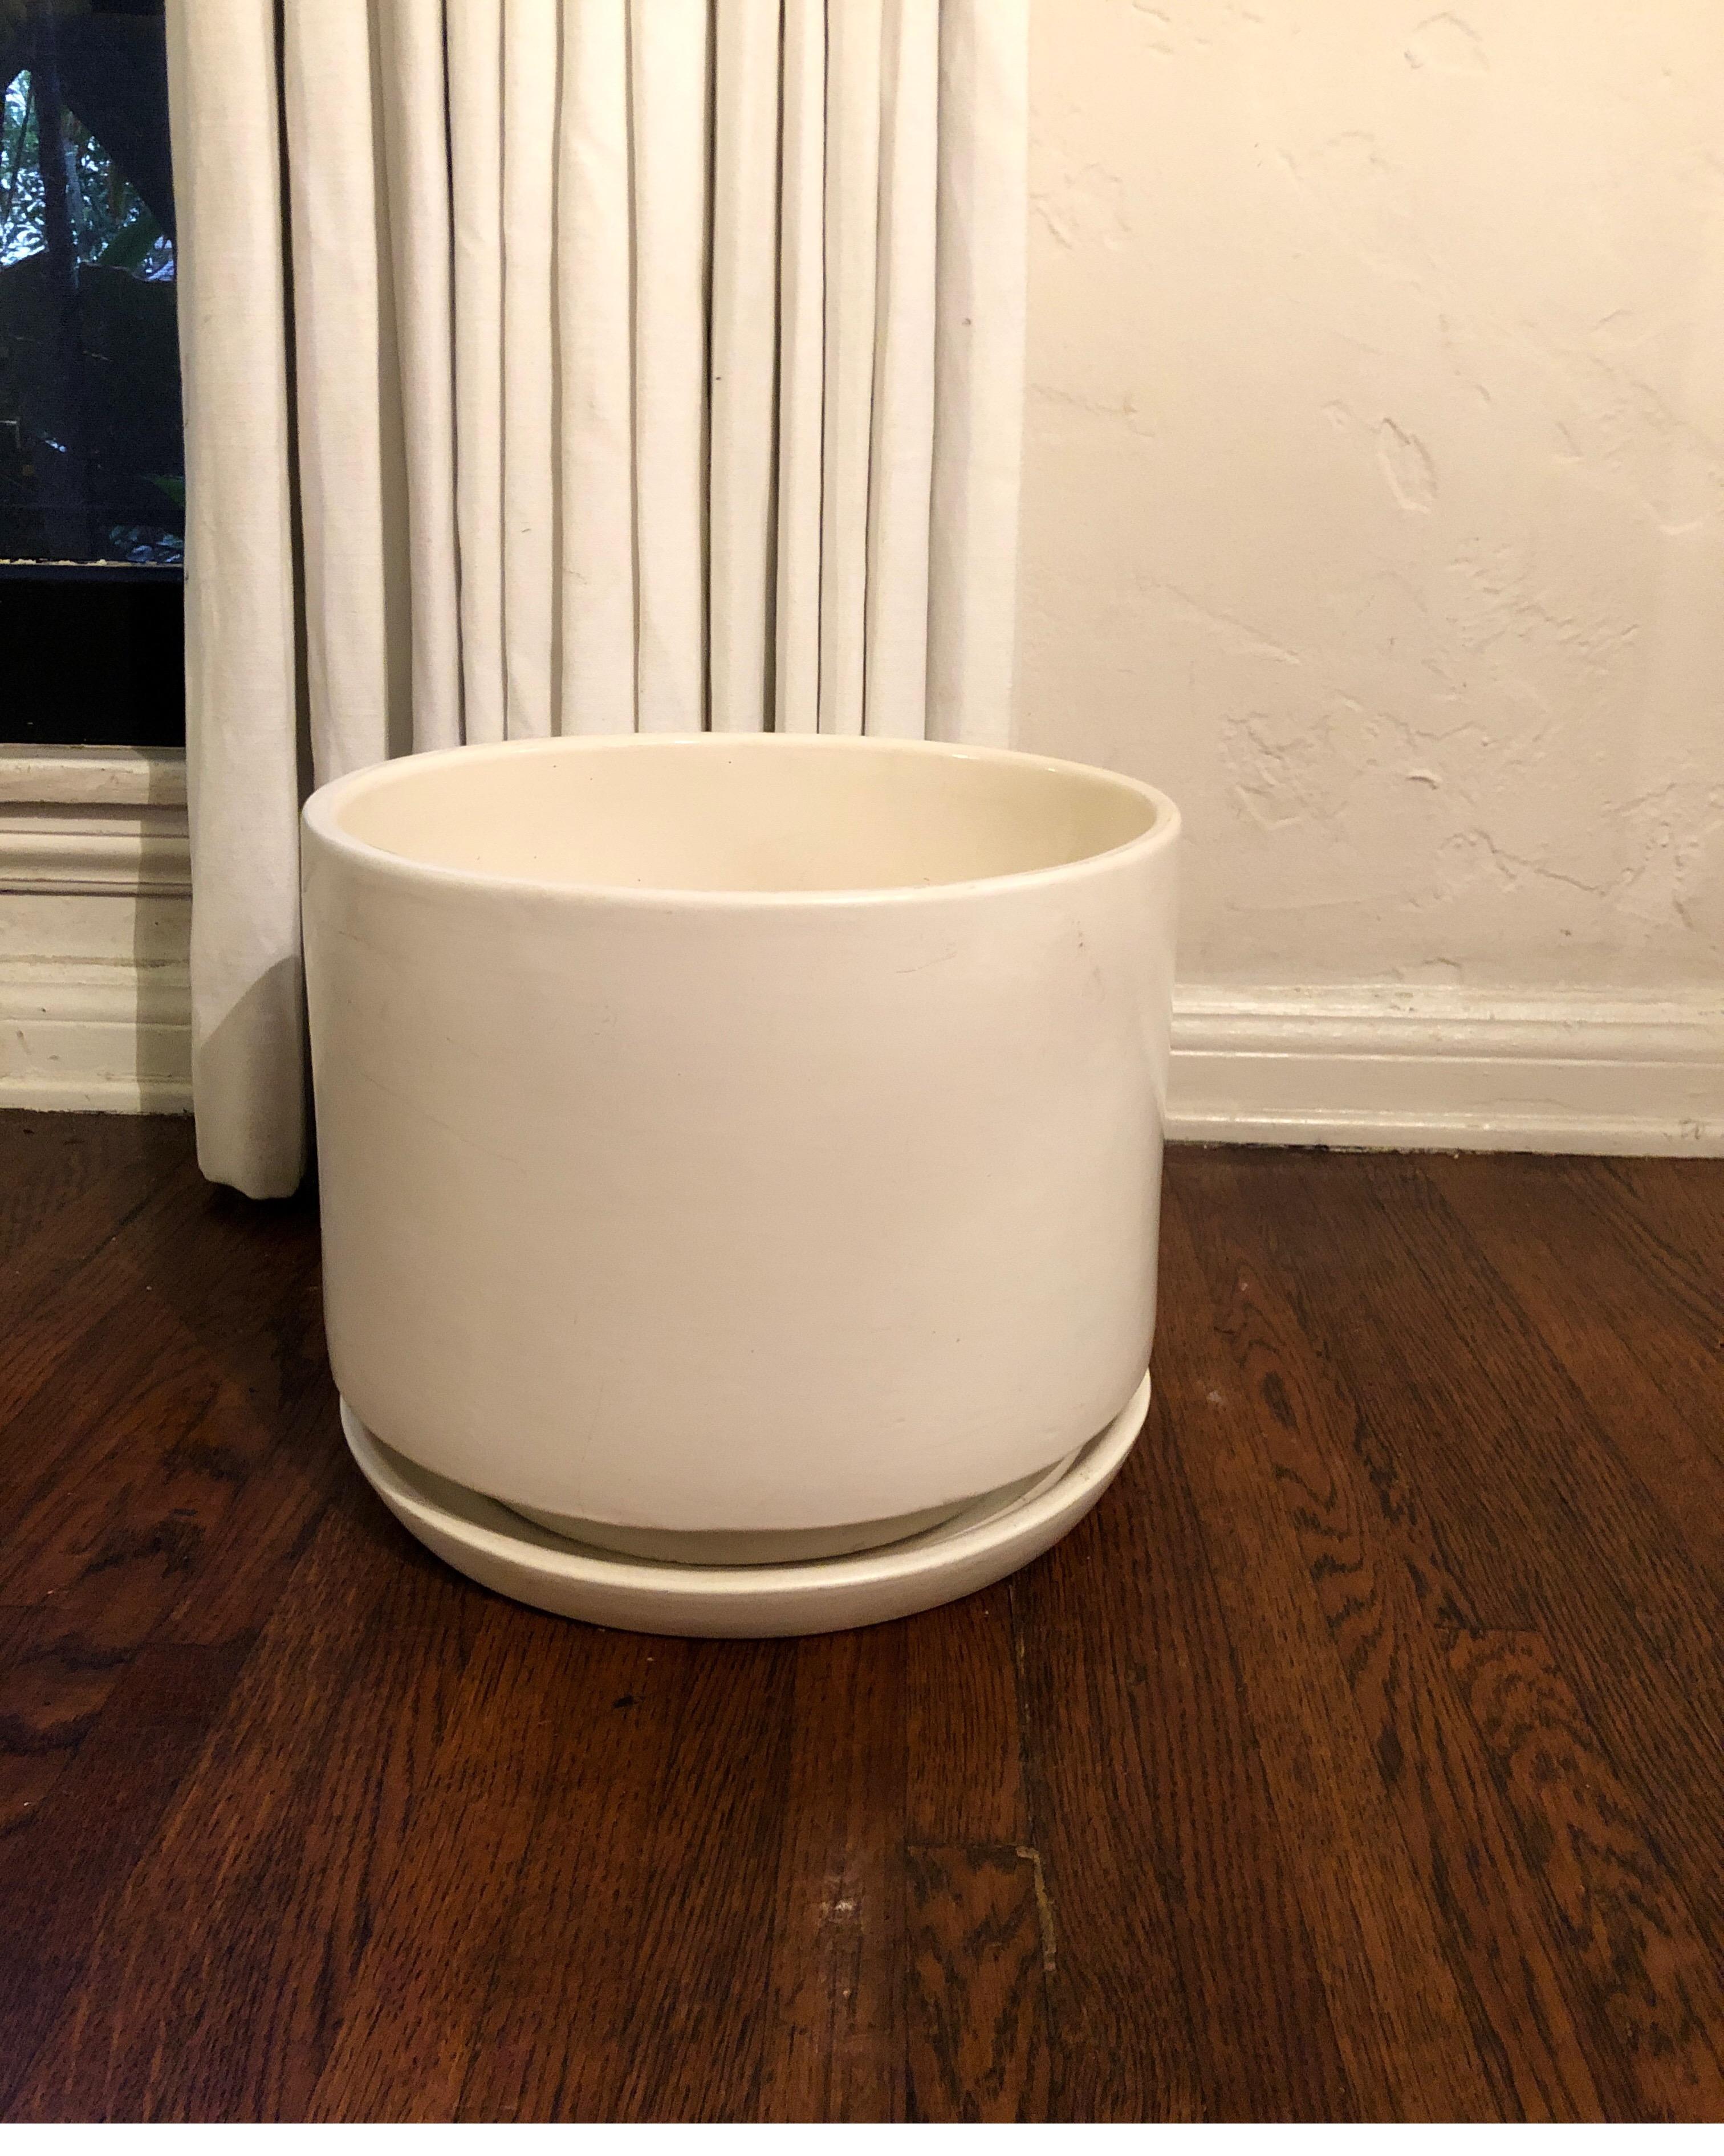 Authentic white Mid-Century Modern Gainey ceramic pot with base. Both pieces signed.
S 12
Overall great condition with no chips or cracks. Some minor scuffs. See pics.